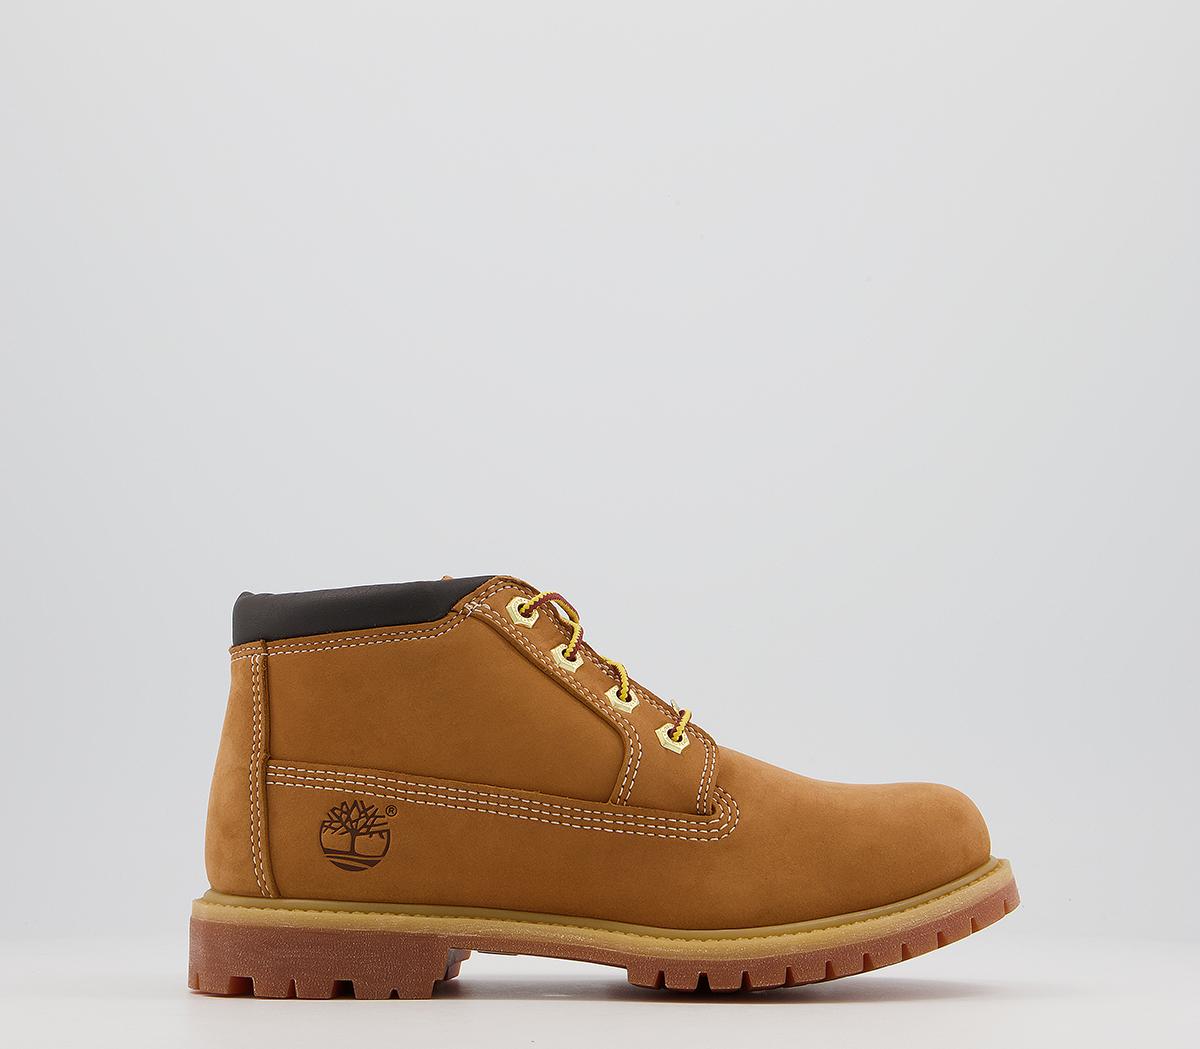 Timberland Nellie Chukka Double Waterproof Boots Wheat Nubuck - Ankle Boots